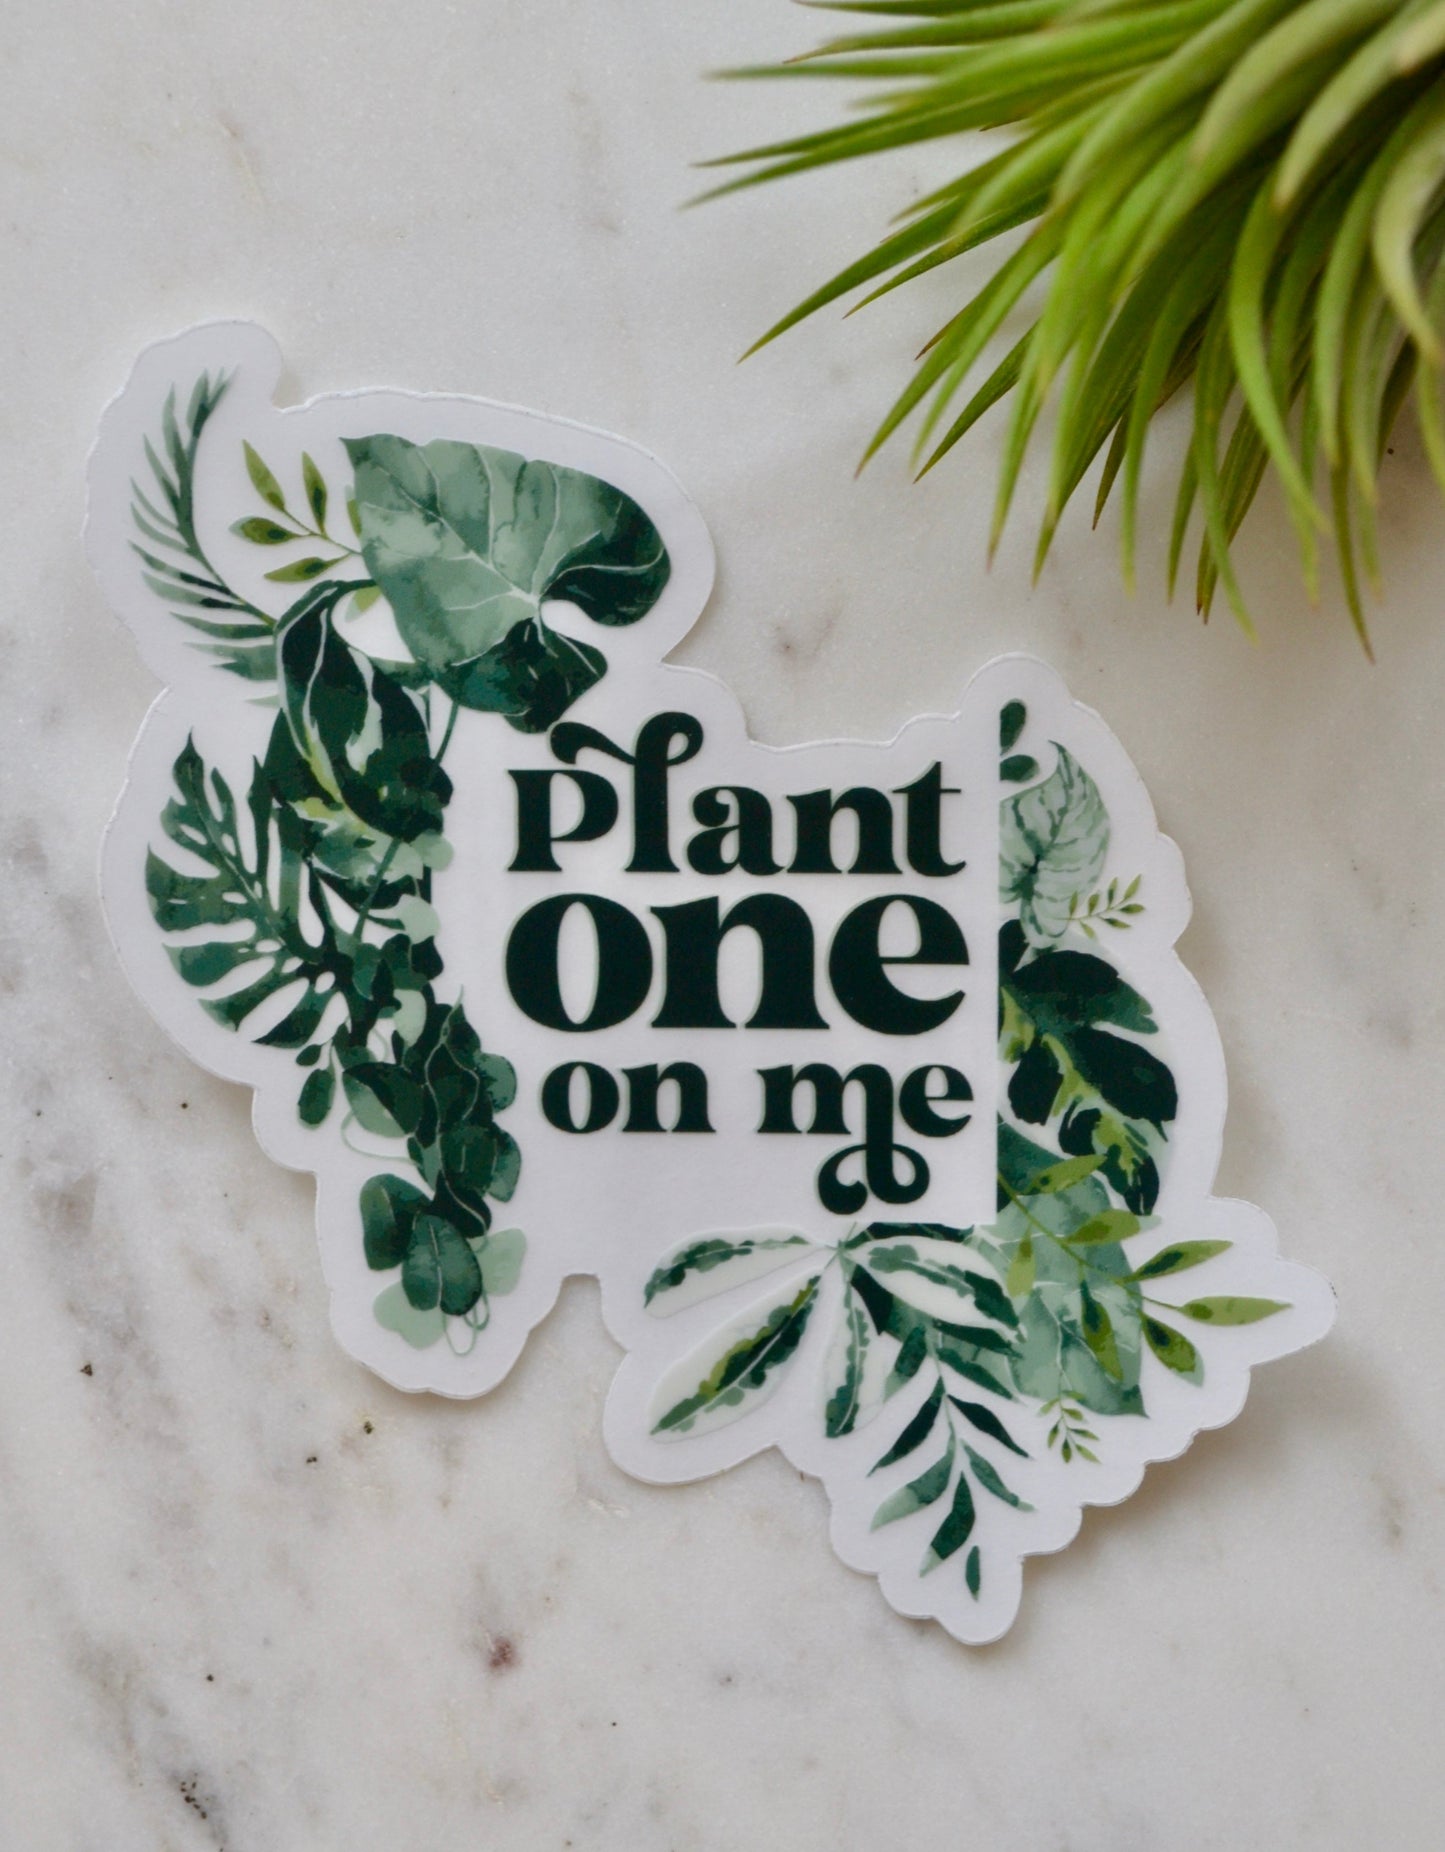 Plant one on me sticker